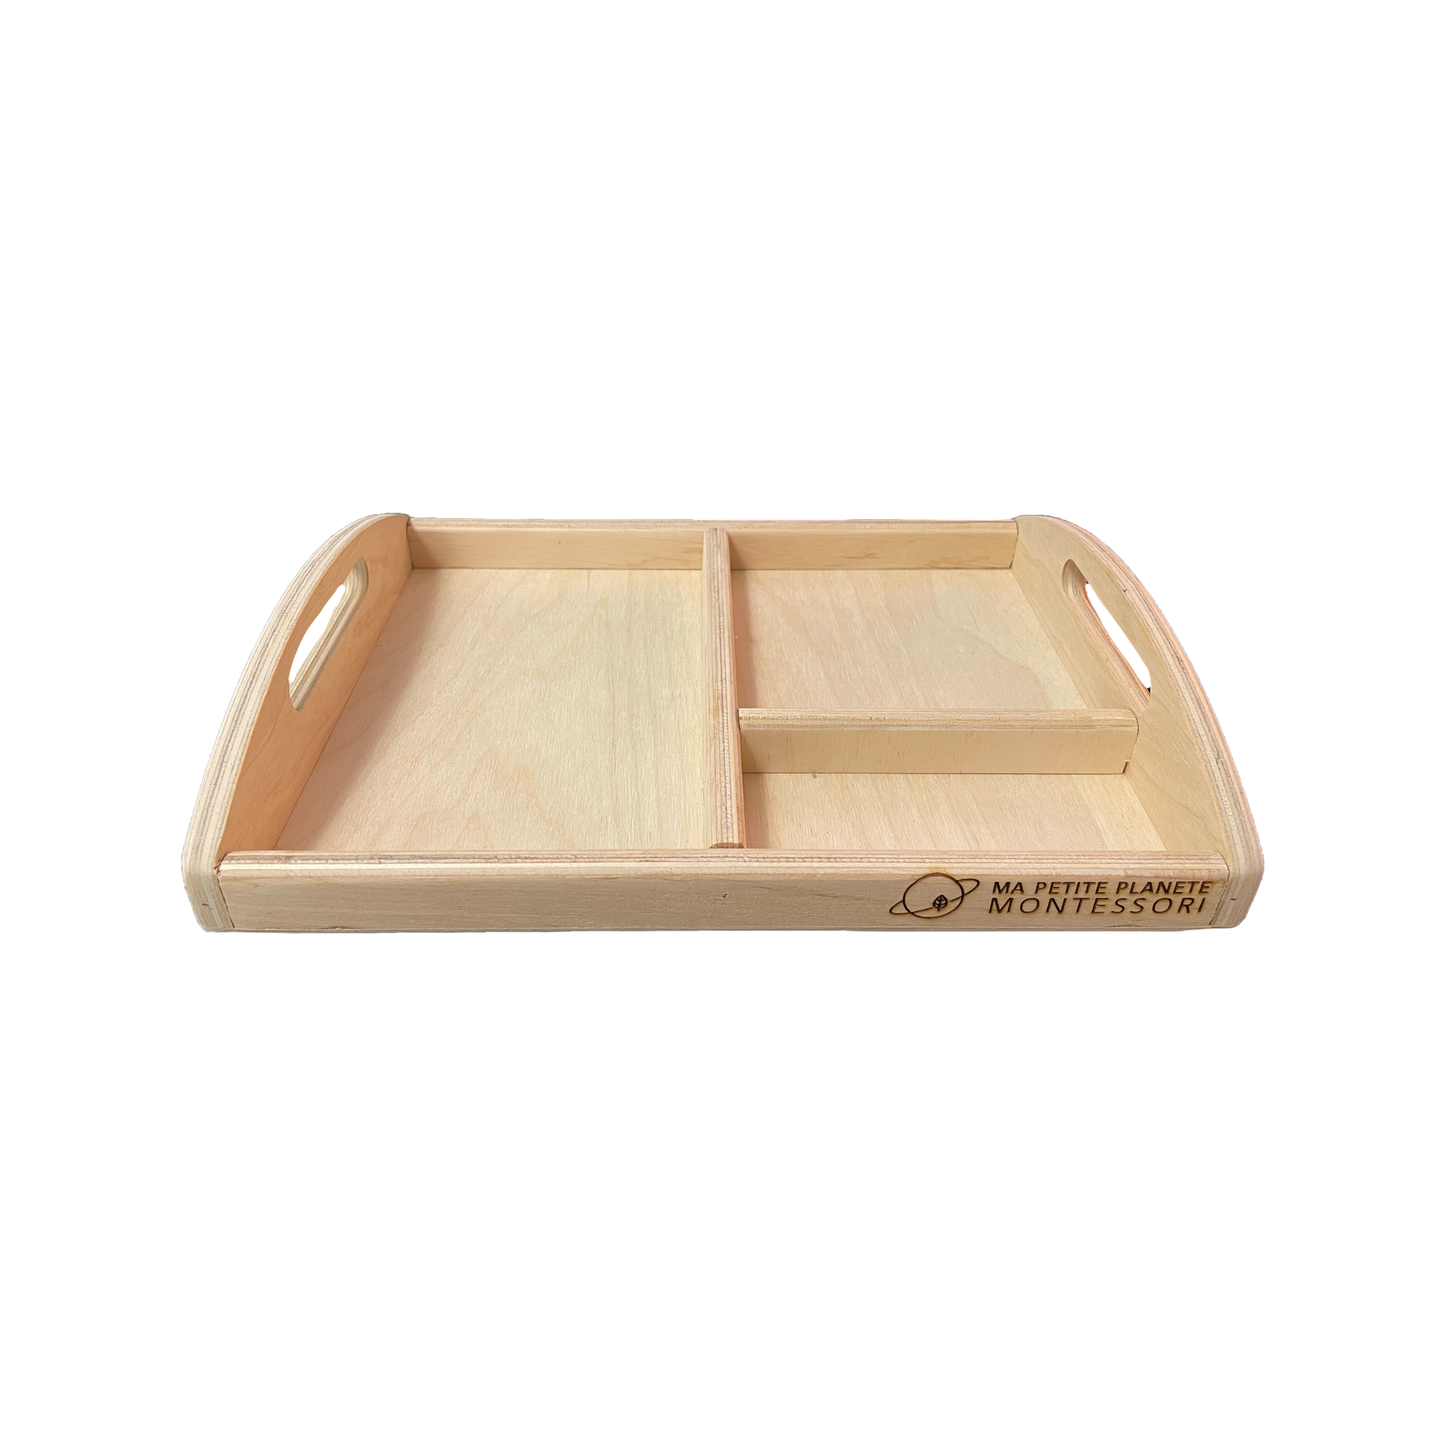 Wooden tray - 3 compartments